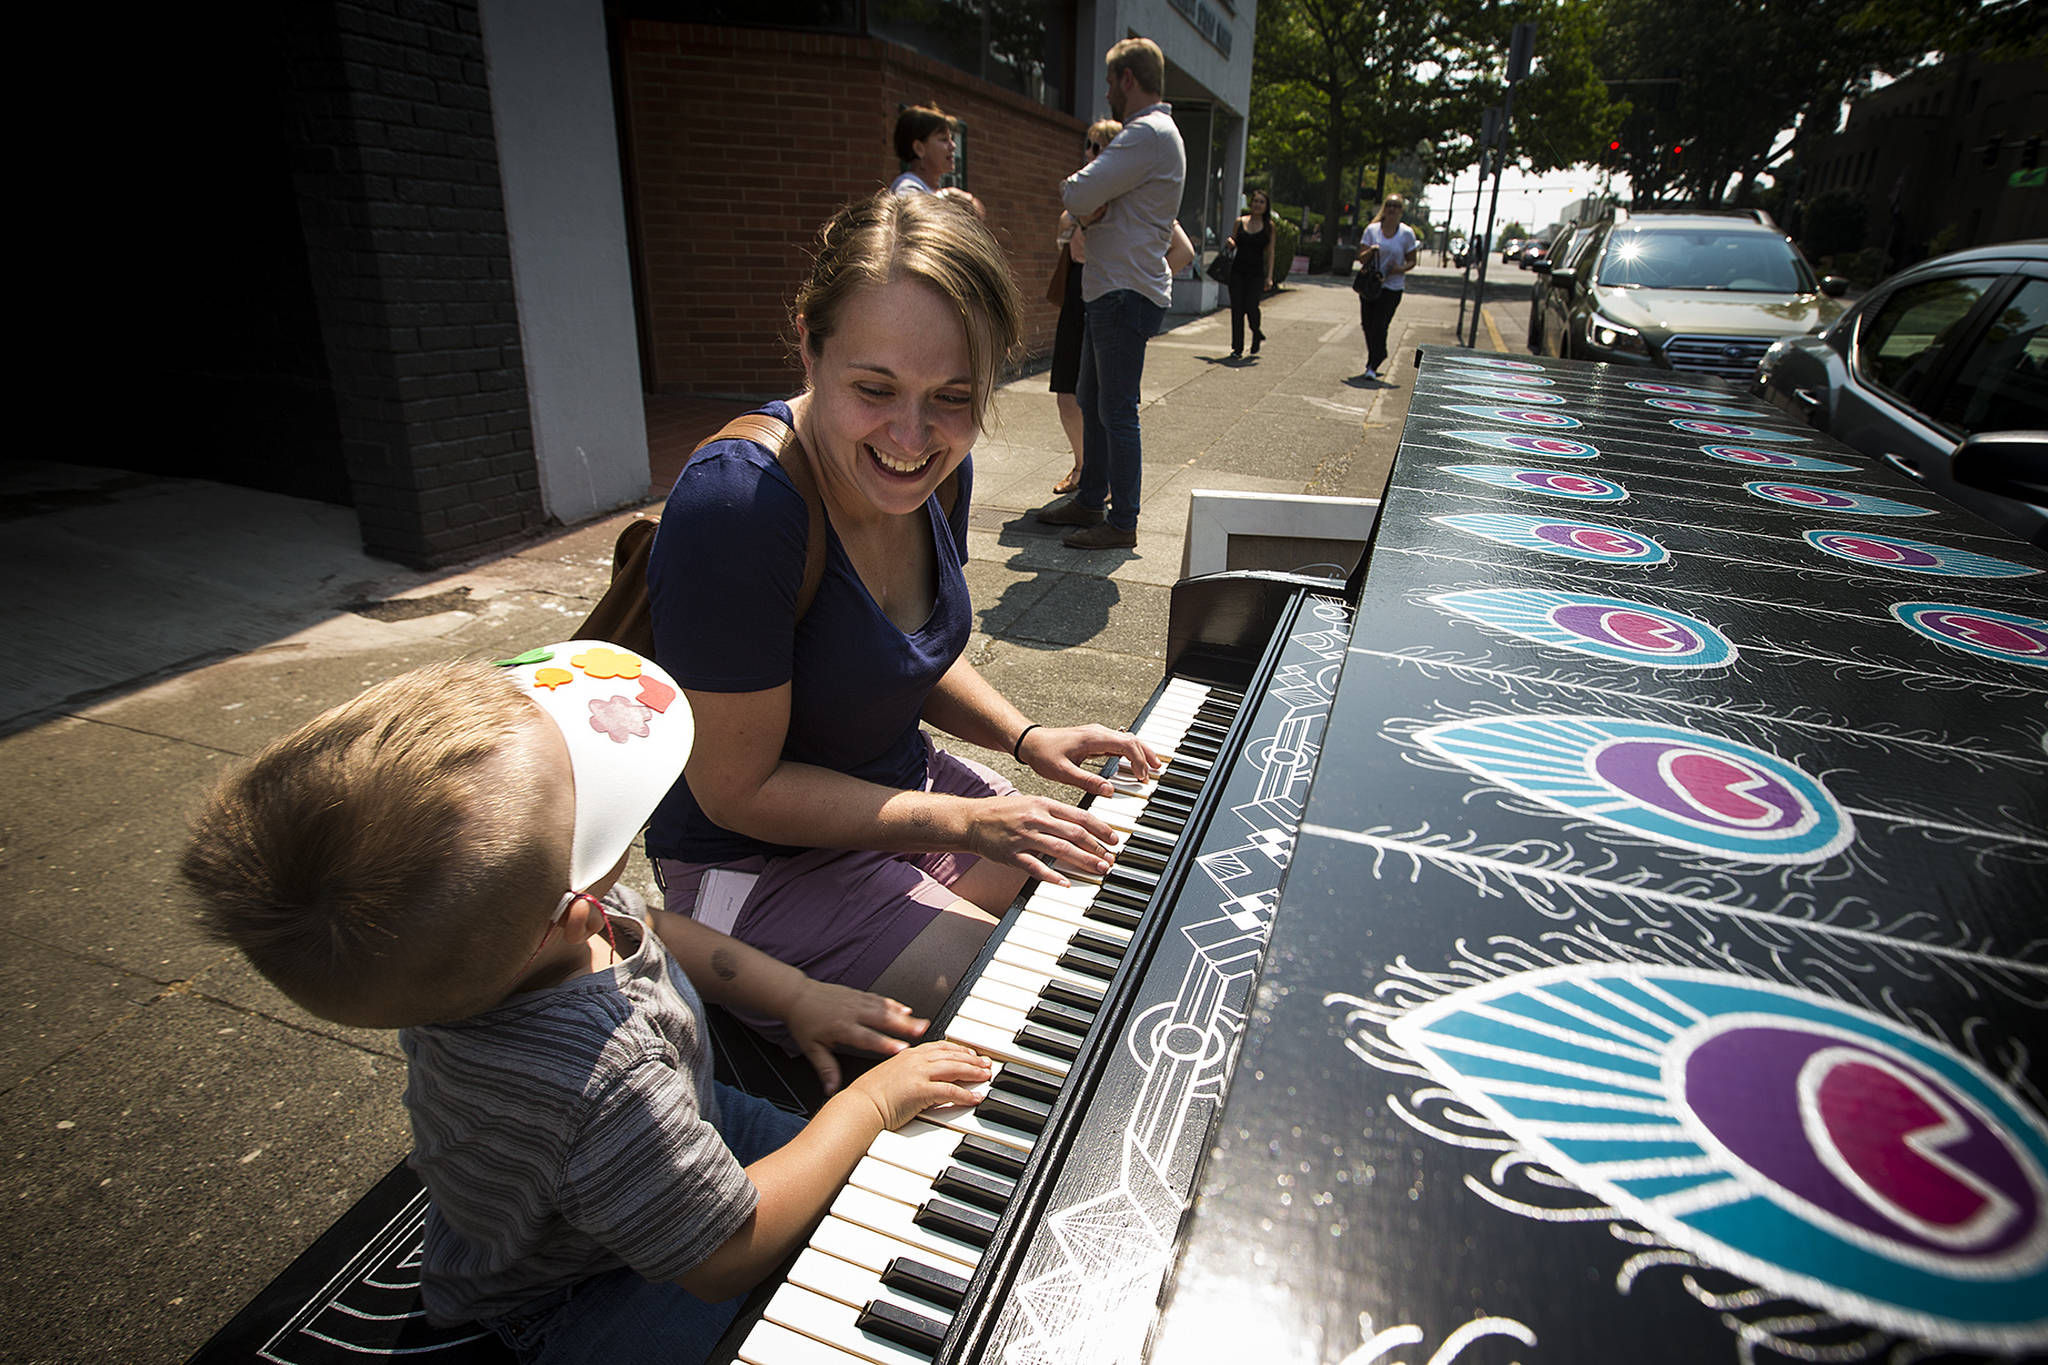 Julia Mooney, of Snohomish, plays a piano, titled “Live Your Song” by artist Rosemary Jones, outside Narrative Coffee in Everett on Wednesday, Aug. 2. Eighteen pianos have been installed around downtown for Street Tunes which lasts until Aug. 22. (Ian Terry / The Herald)